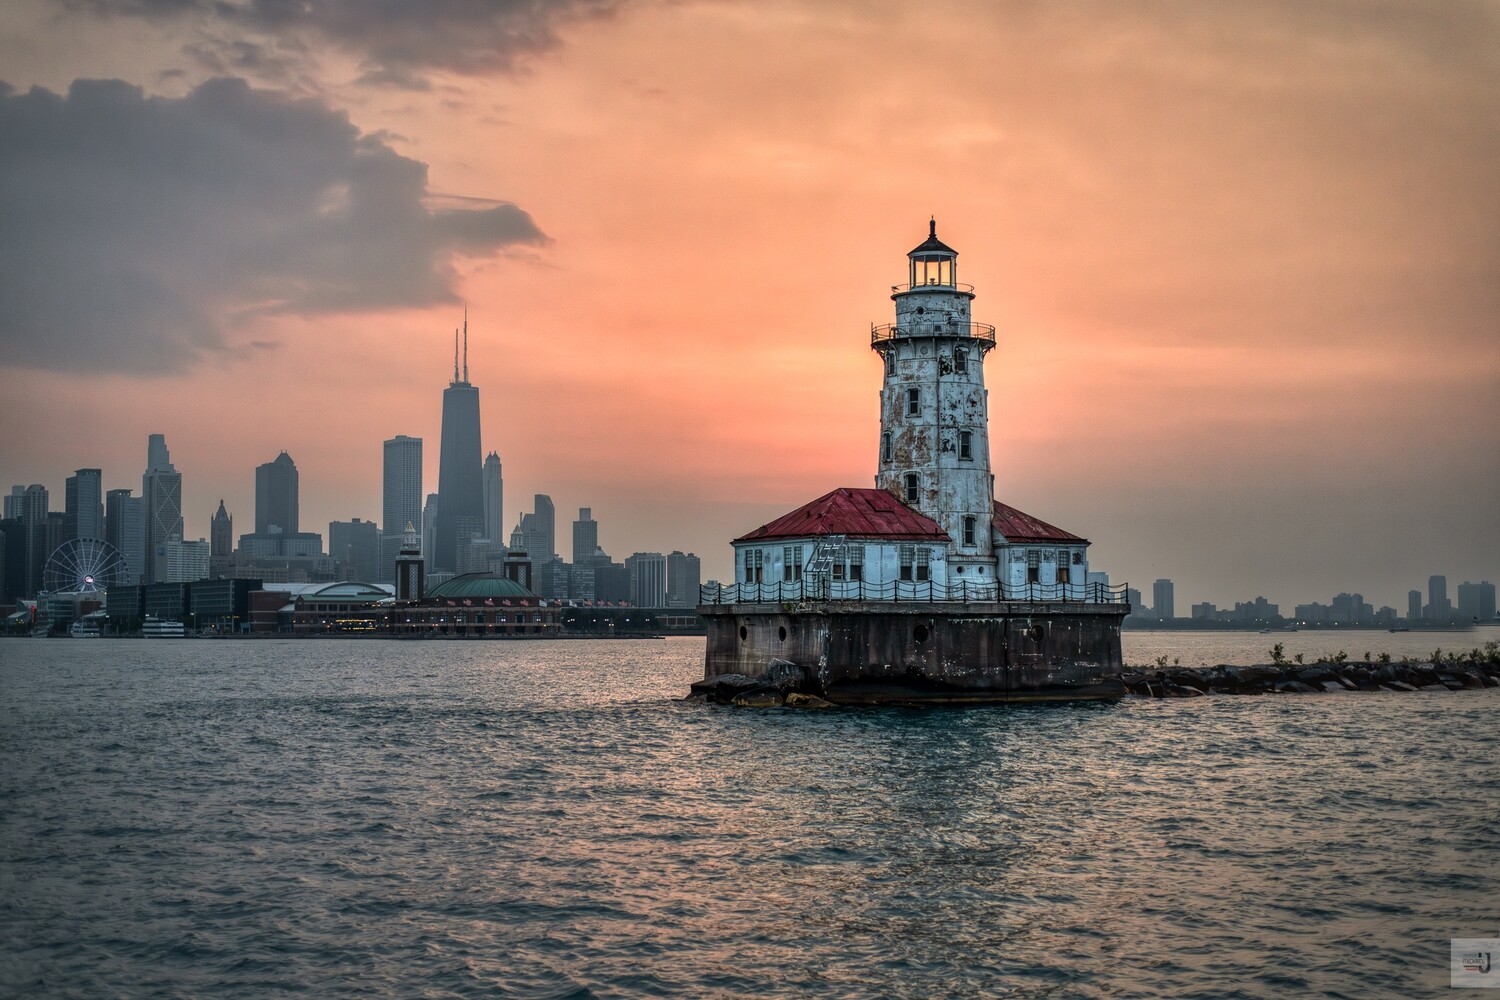 Chicago Lighthouse during a smoky Sunset